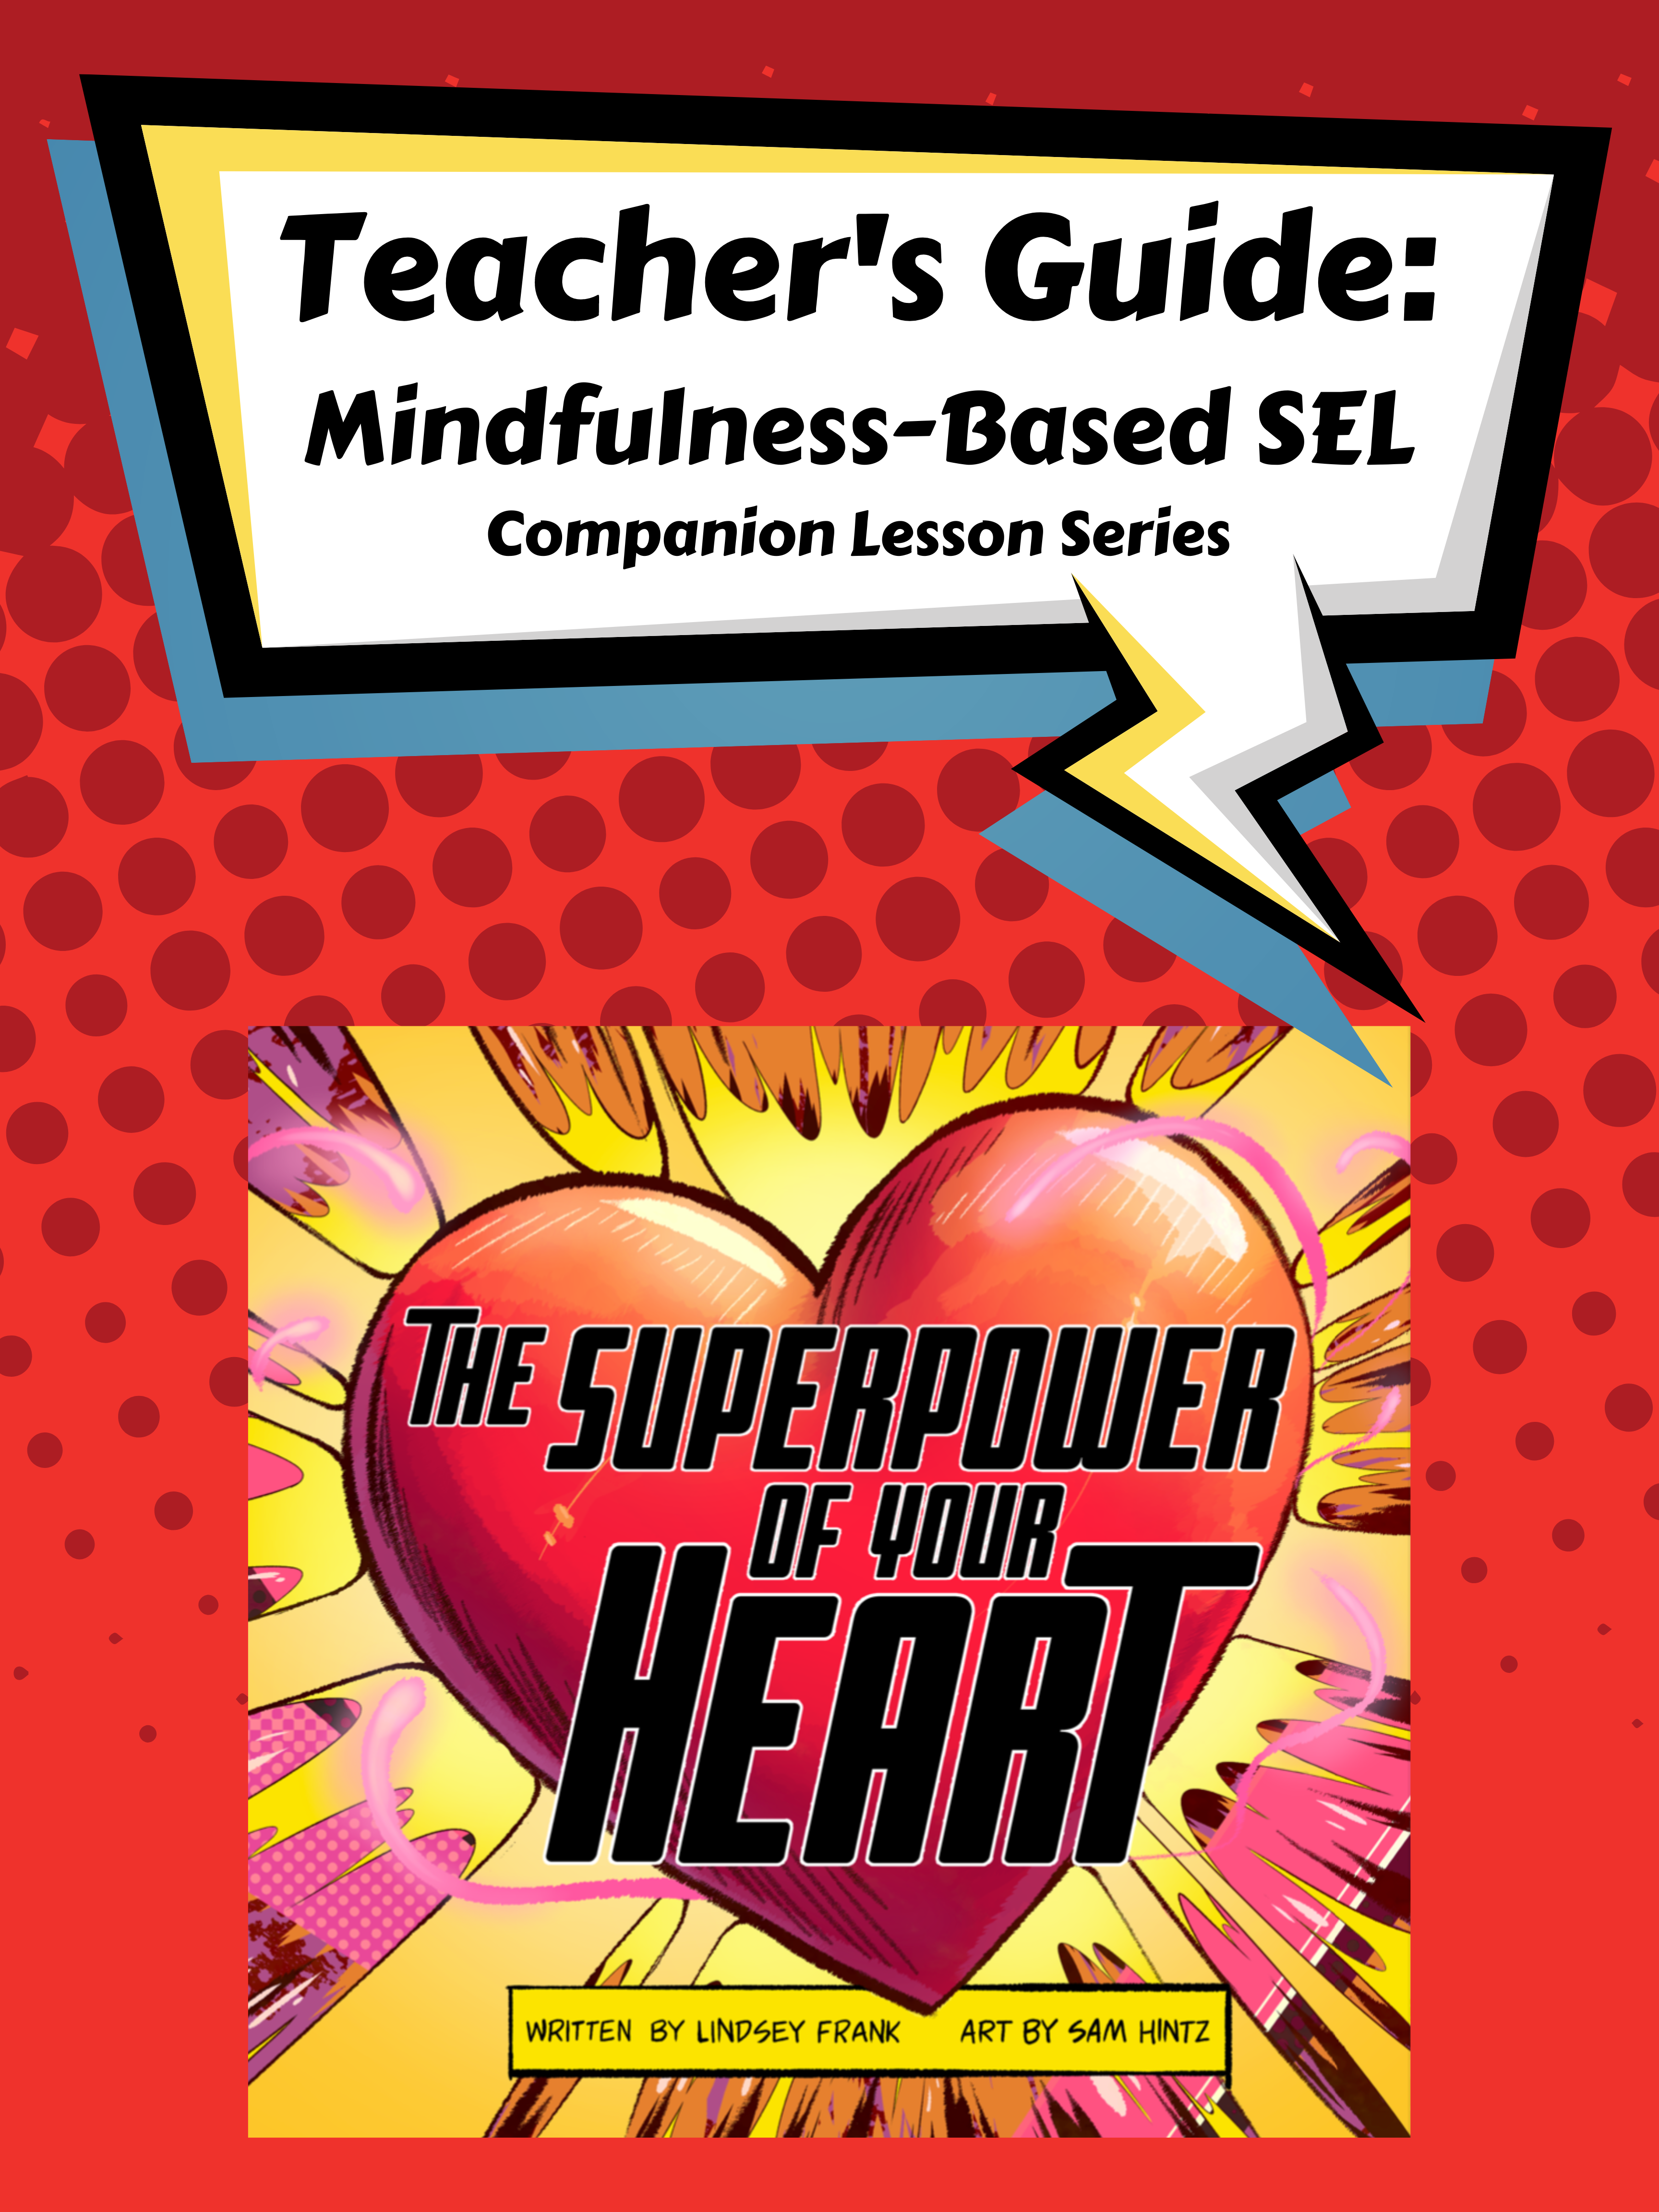 Mindfulness-Based SEL Teacher's Guide: The Superpower of Your HEART thumbnail